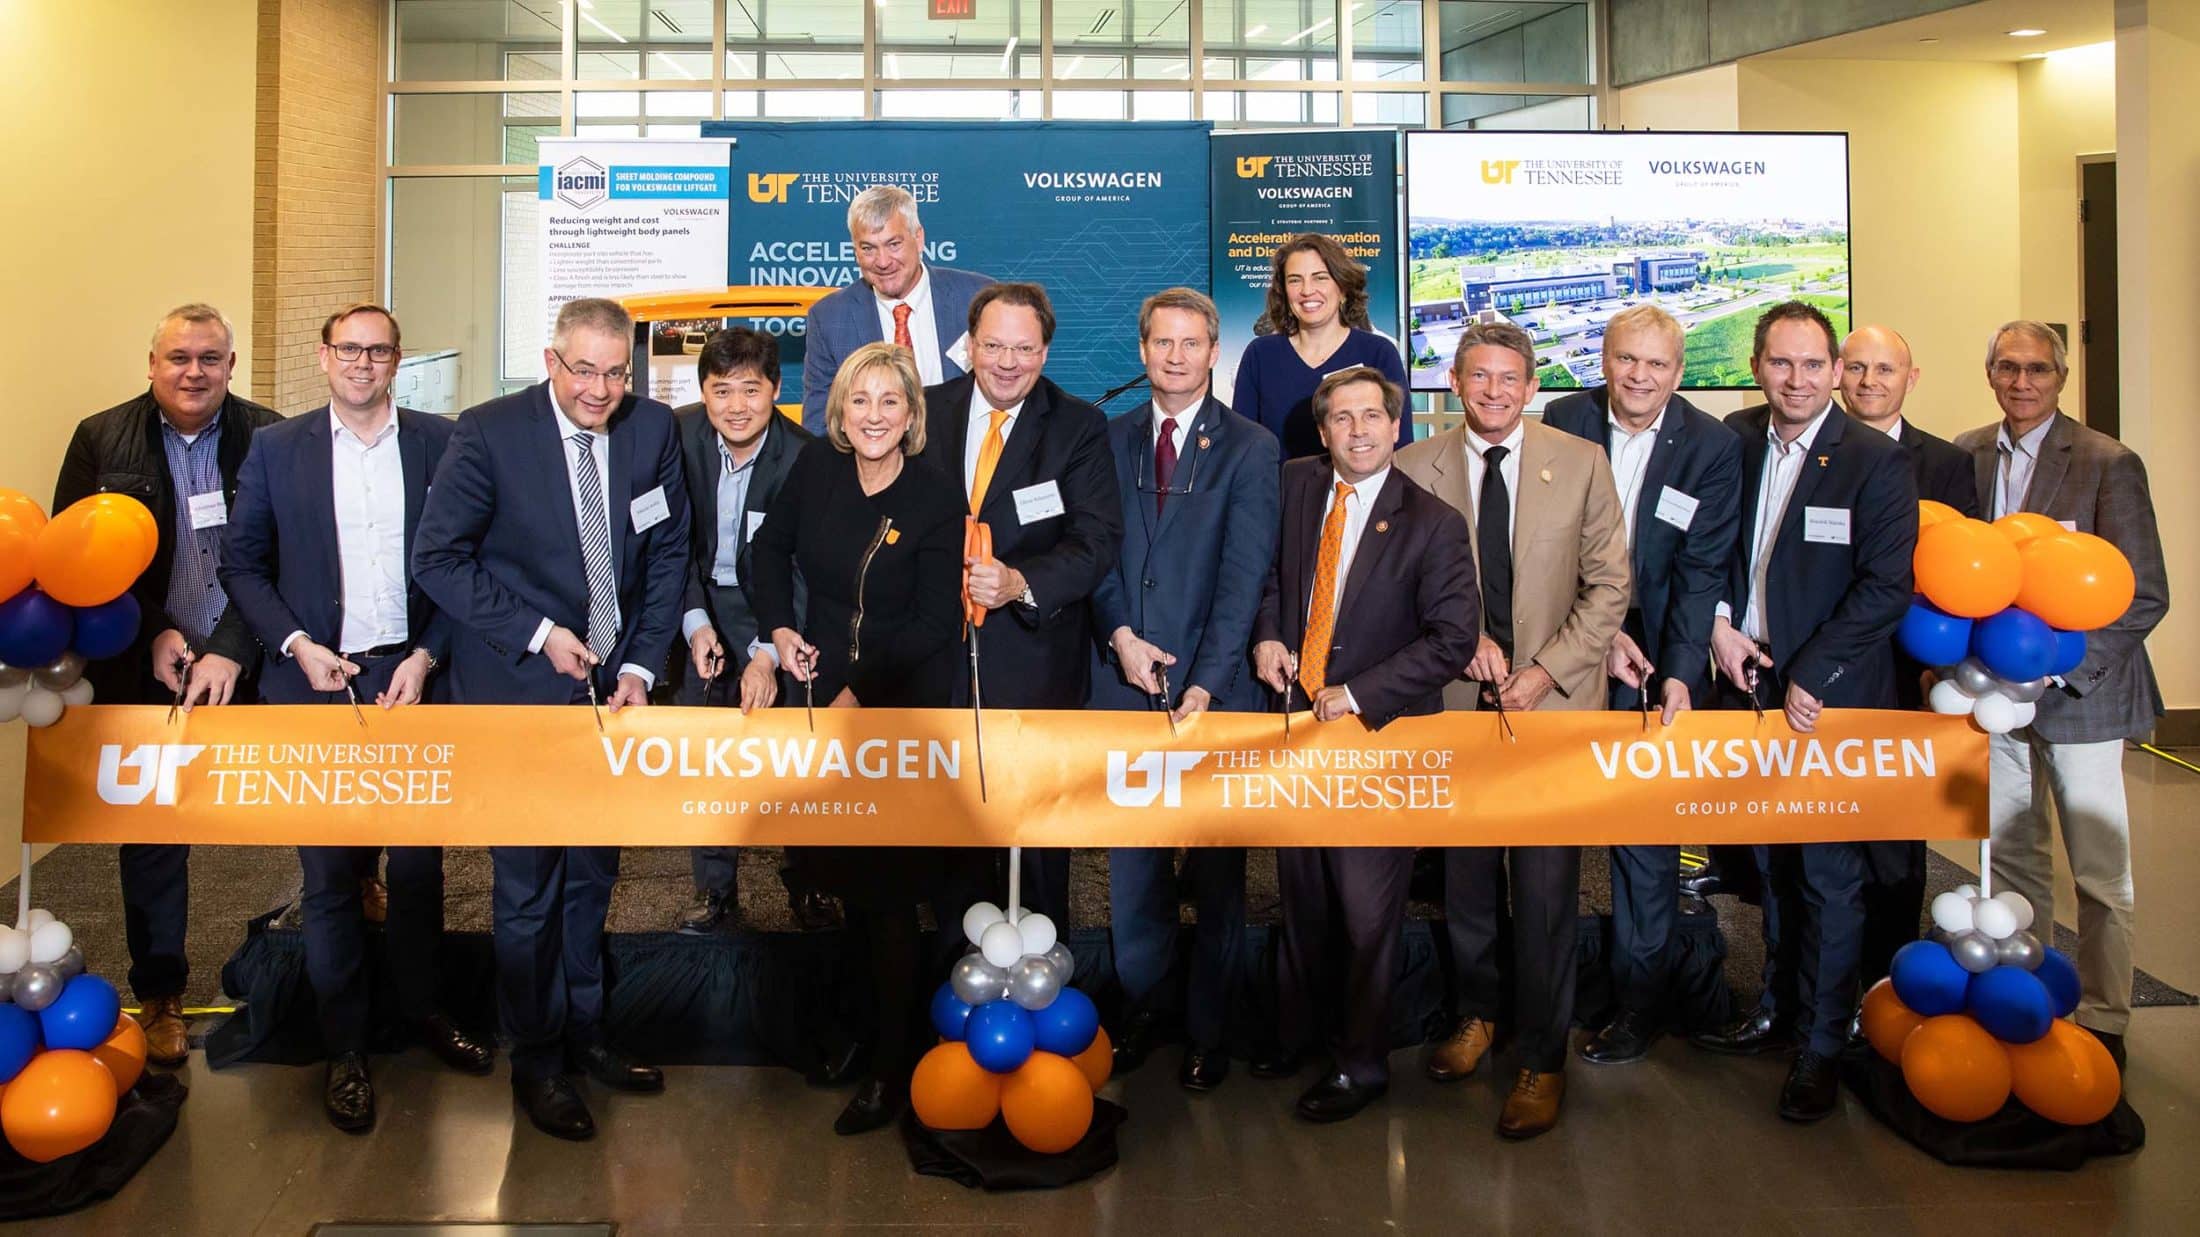 Several leaders from UT and Volkswagen prepare to cut a large orange ribbon at the announcement of the new Volkswagen Innovation Hub at UT Research Park.